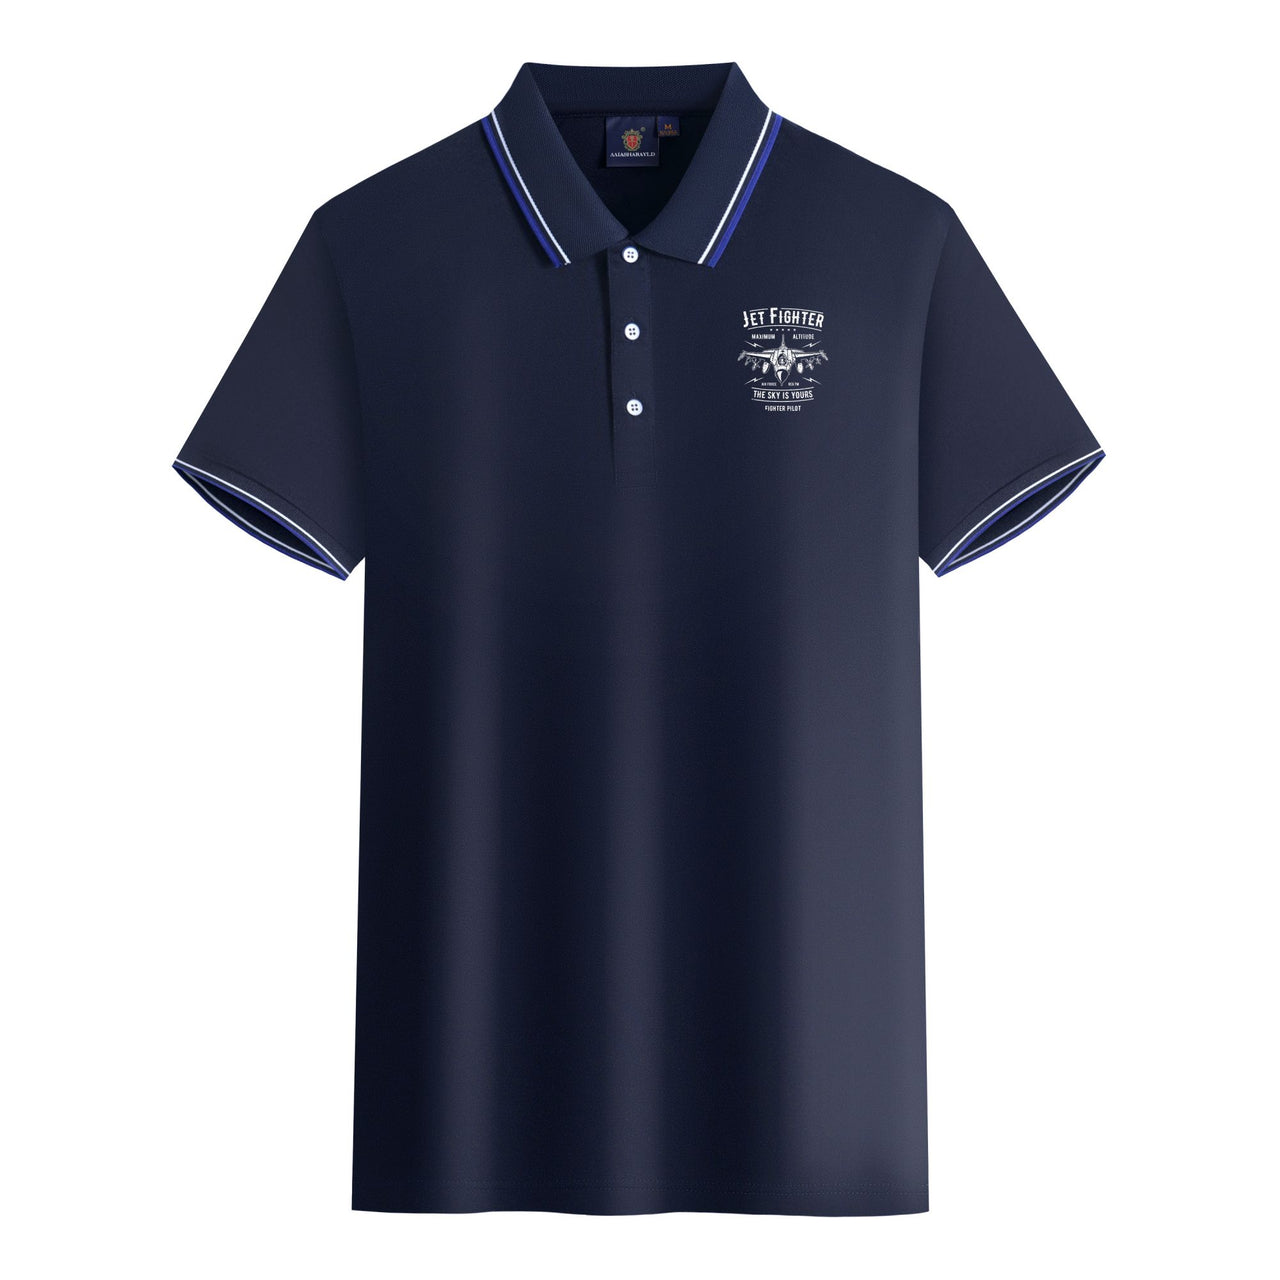 Jet Fighter - The Sky is Yours Designed Stylish Polo T-Shirts